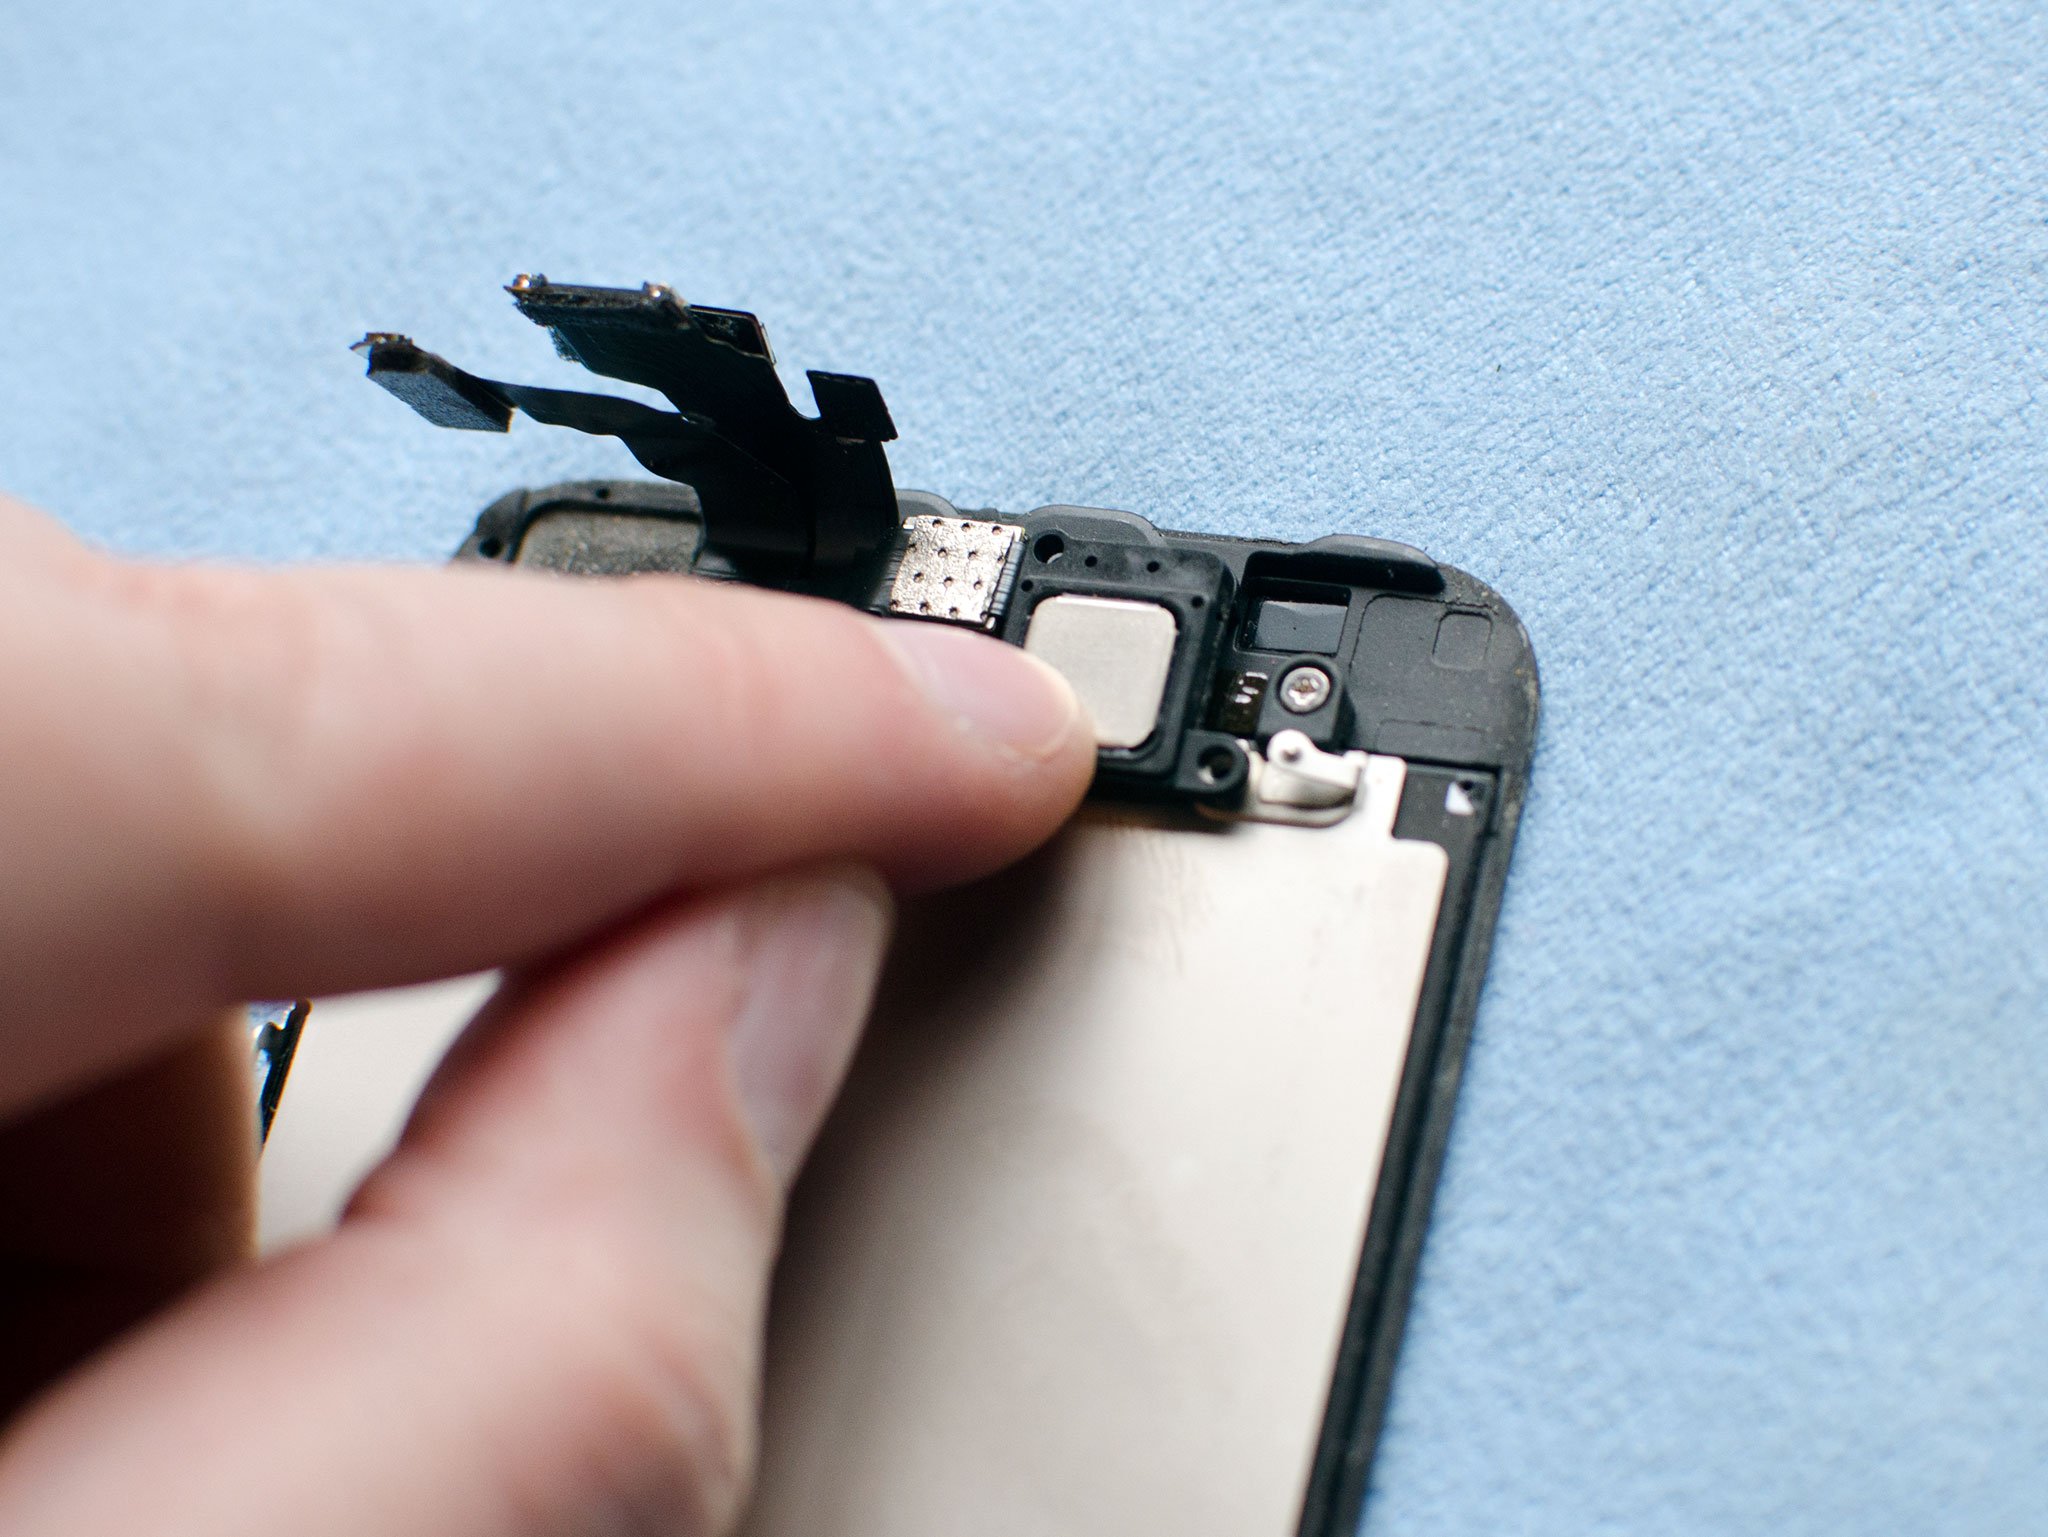 How to DIY replace a blown earpiece on an iPhone 5